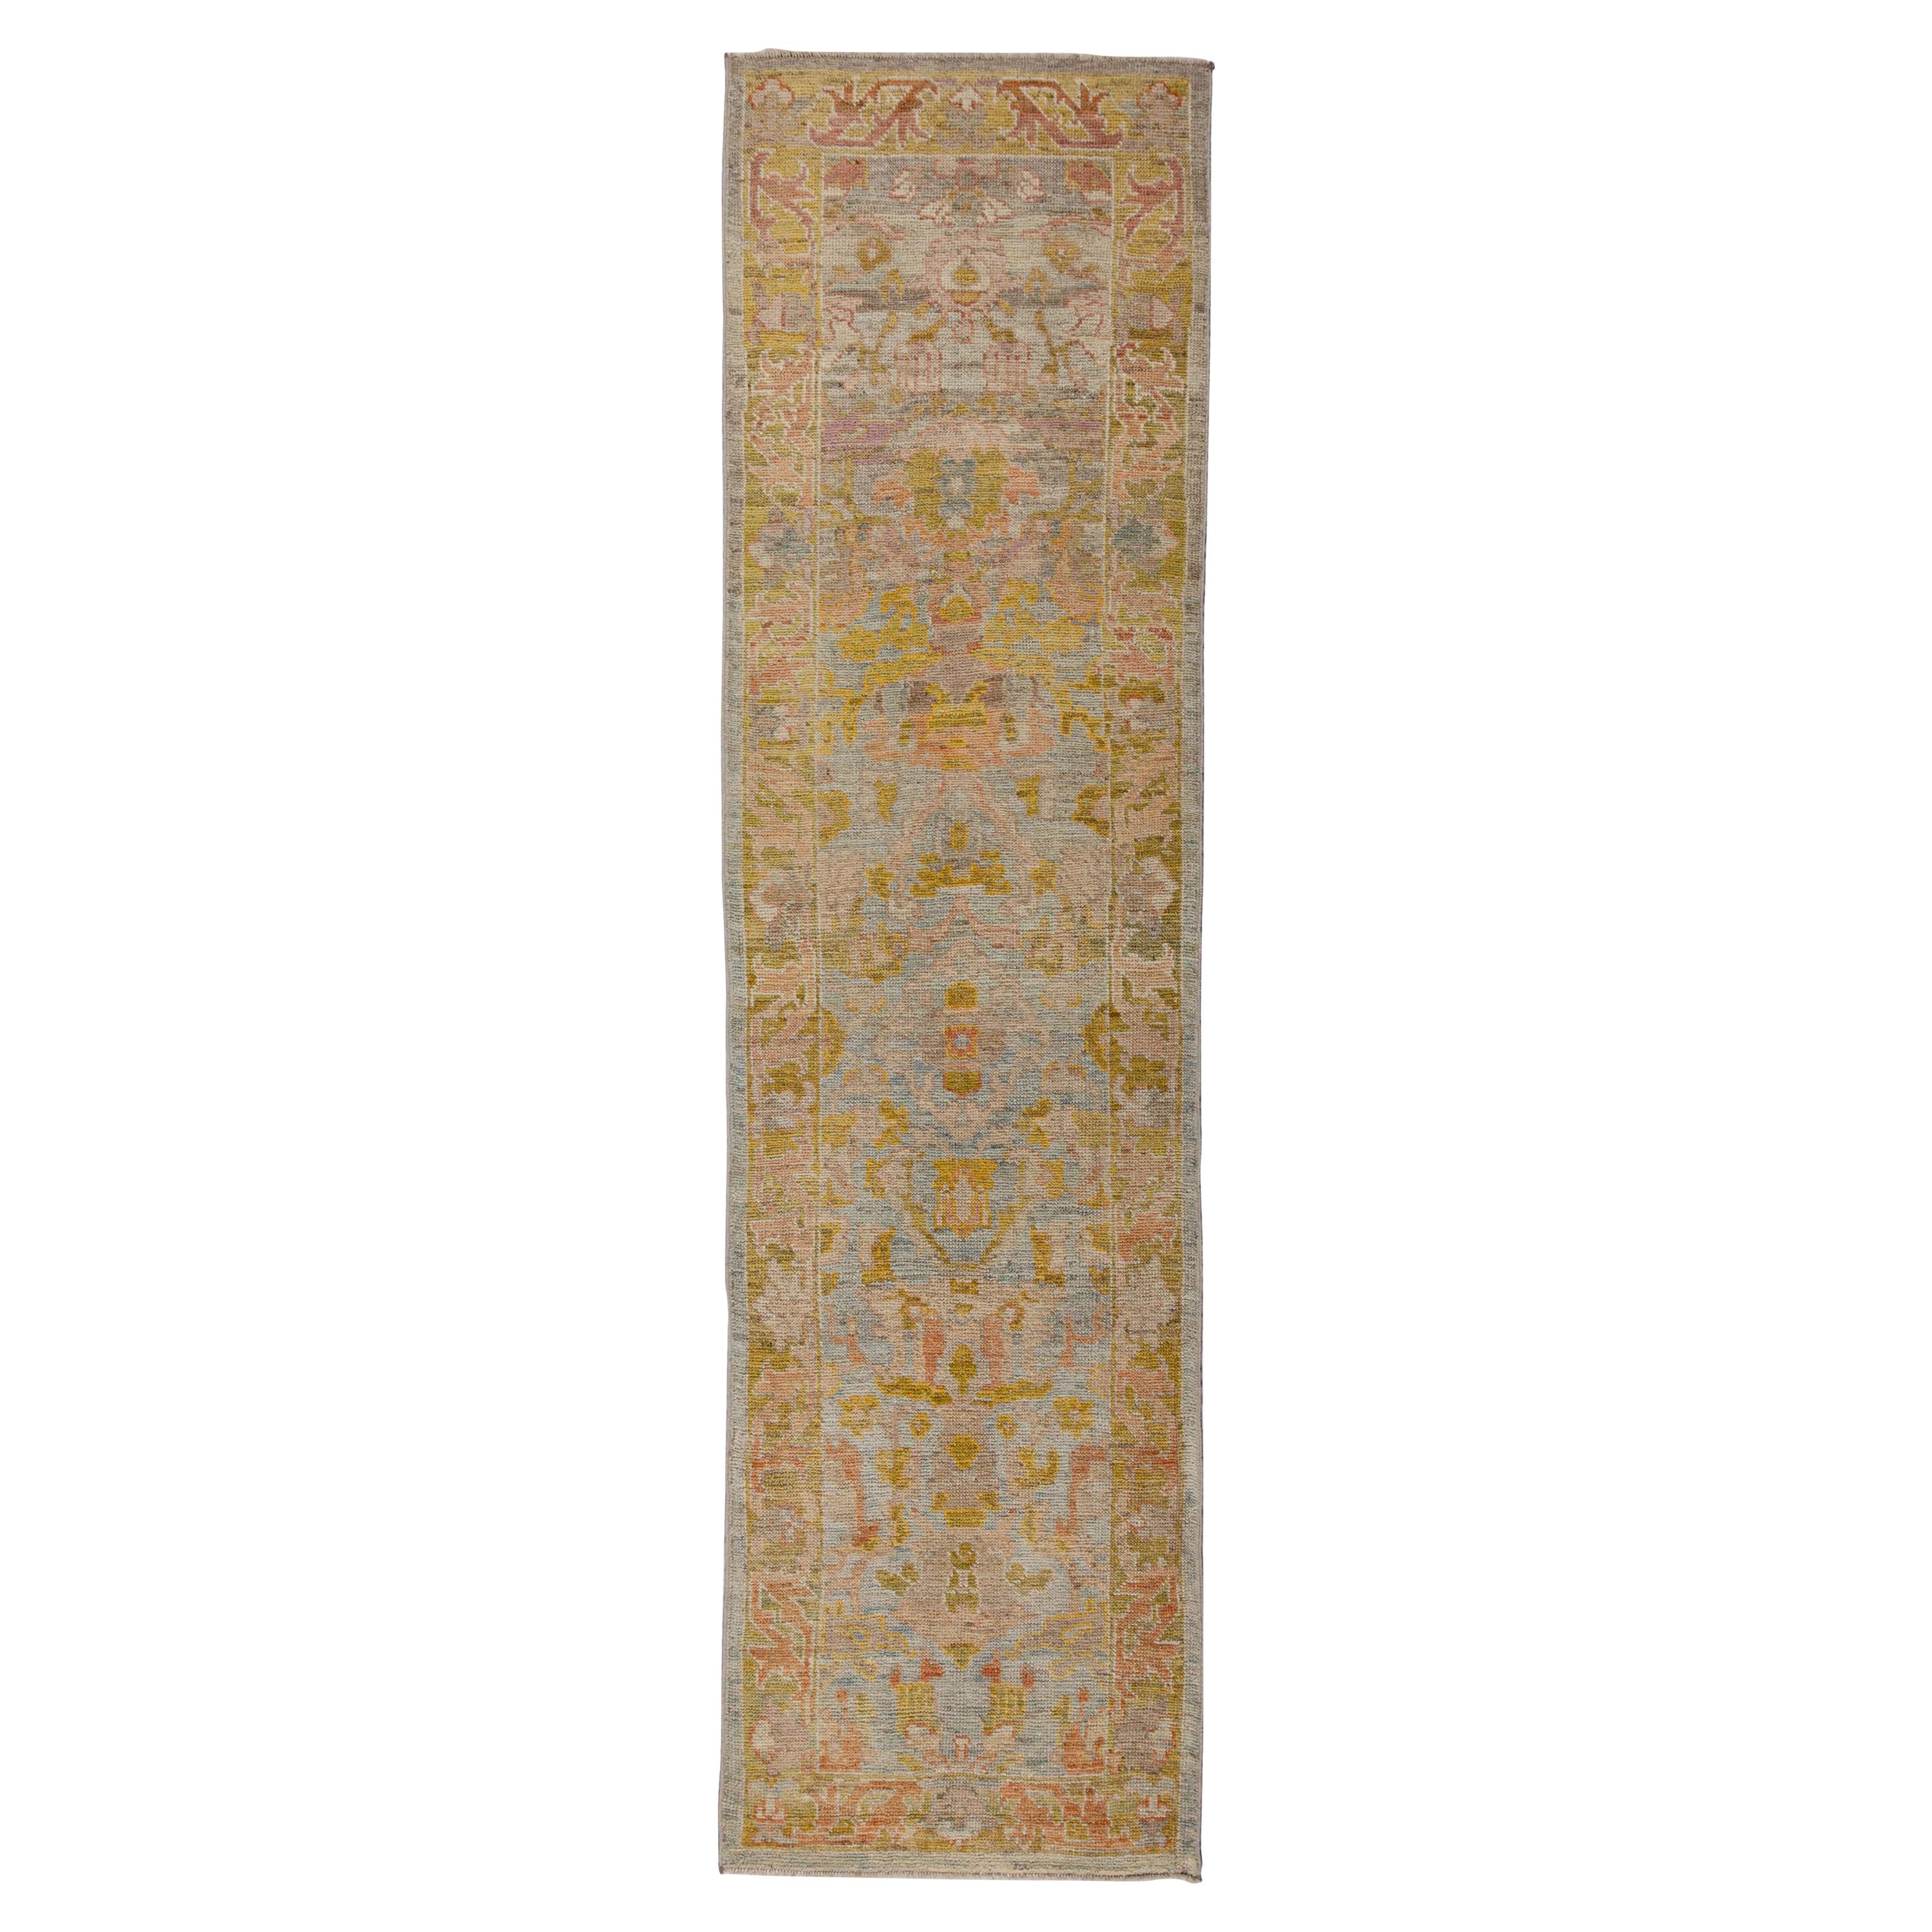 Contemporary Oushak Runner Rug from Turkey with Gold and Pink Floral Patterns